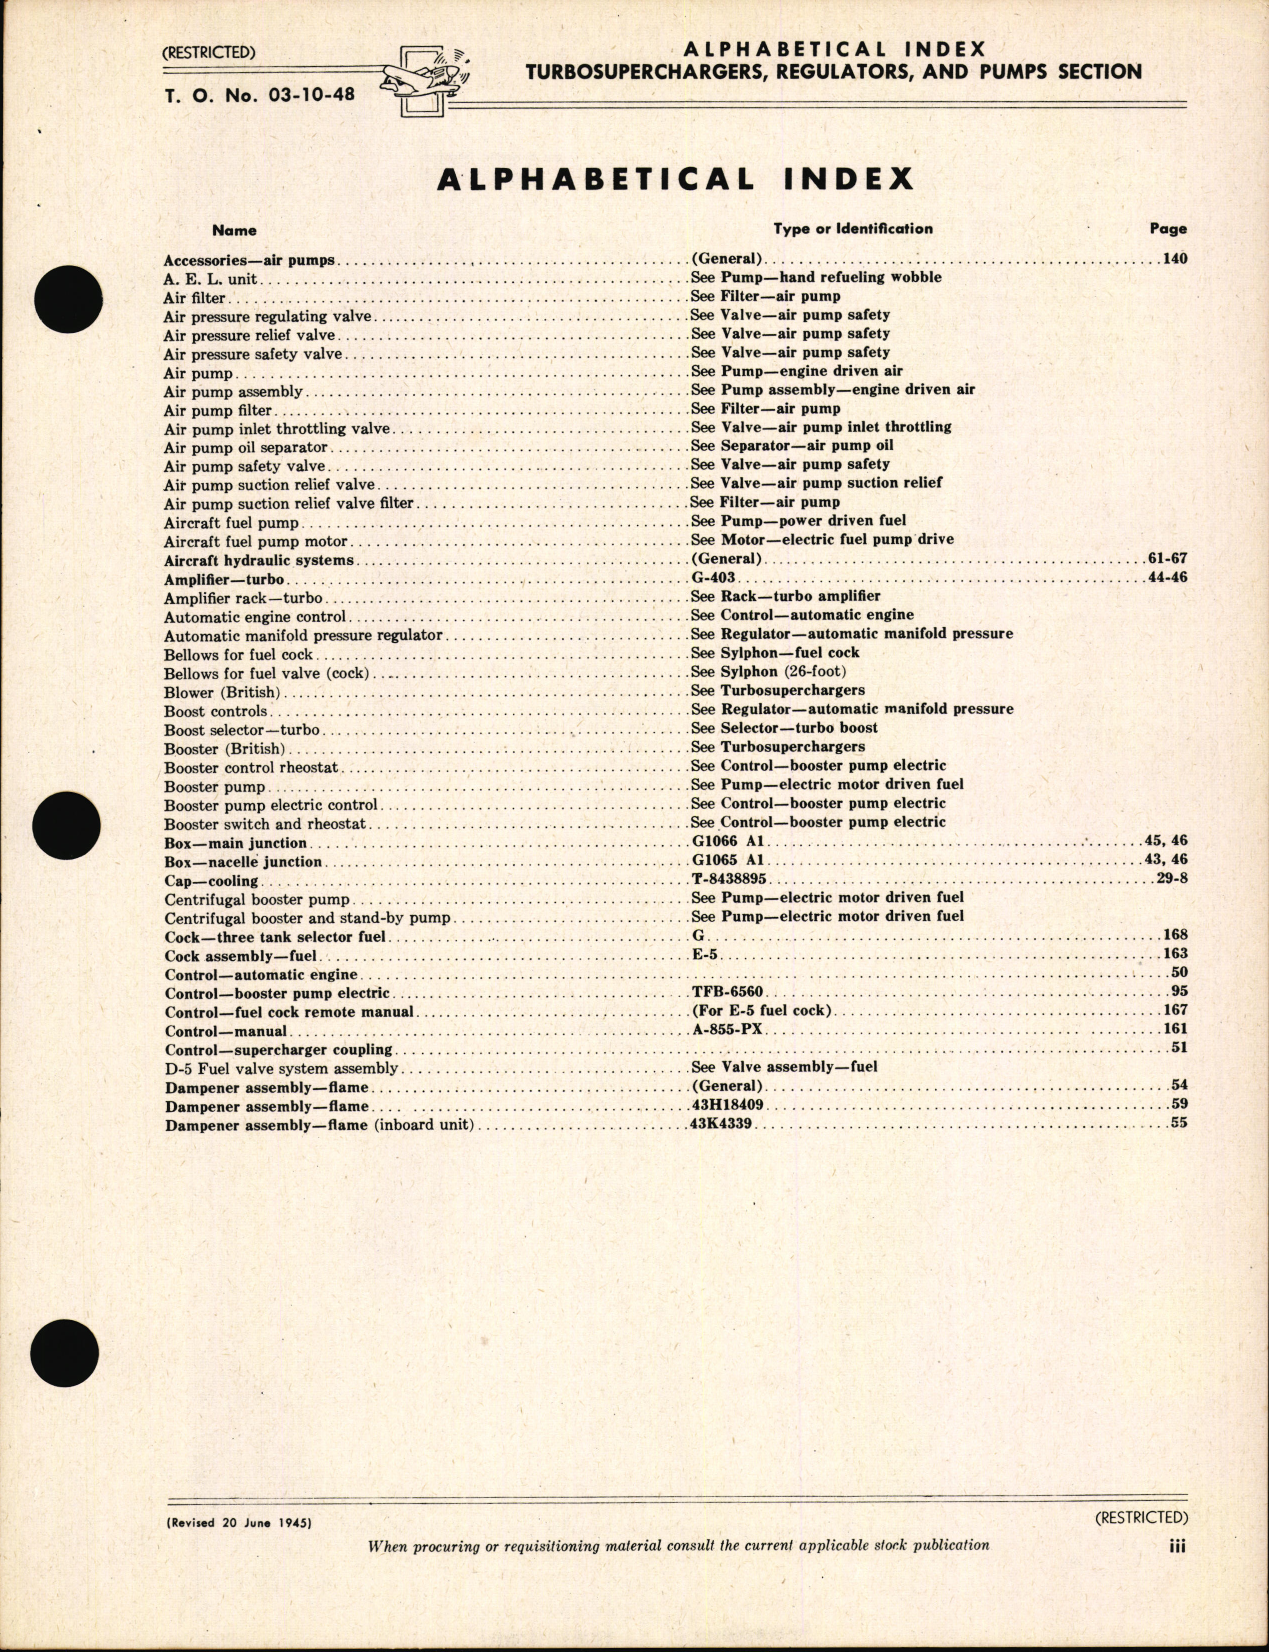 Sample page 5 from AirCorps Library document: Index of Army-Navy Aeronautical Equipment - Turbosuperchargers and Regulators, Pumps, and Pump Accessories